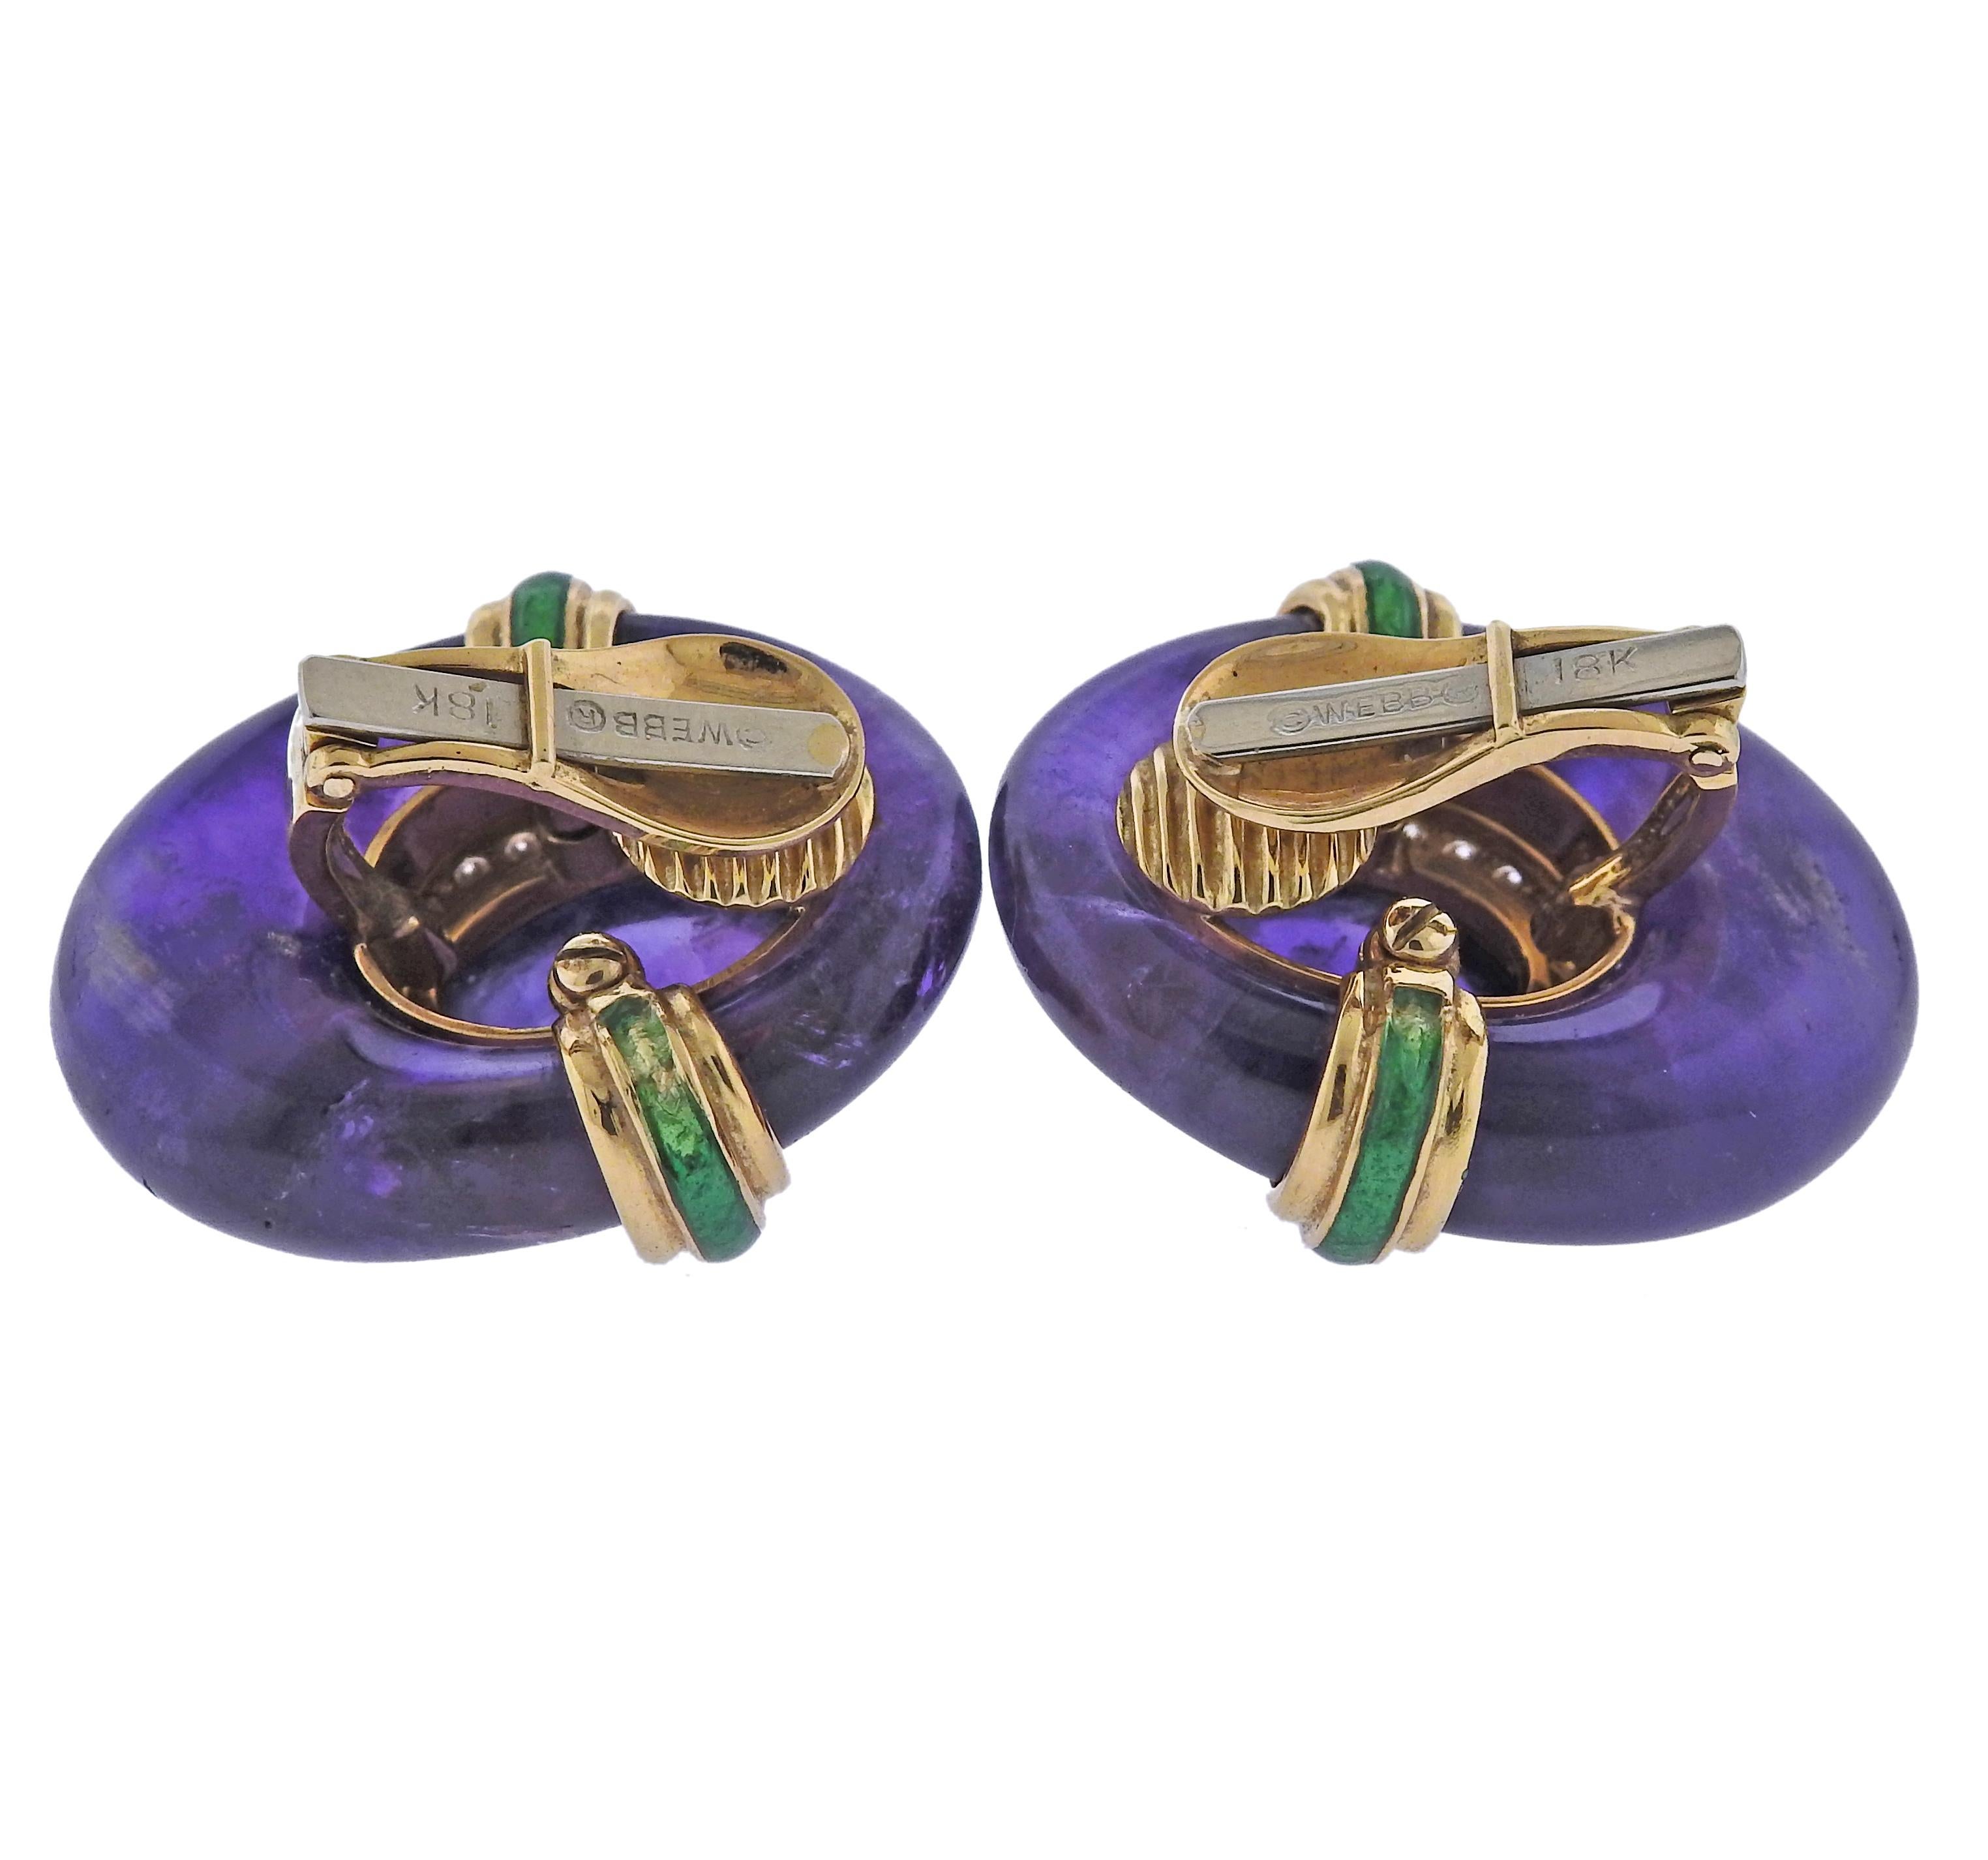 Pair of 18k gold earrings by David Webb, with amethyst (one stone has a hairline fracture) and approx. 0.44ctw  VS-SI1/H diamonds.  Earrings are 28mm x 27mm. Marked:  Webb, 18k. Weight - 33.8 grams.